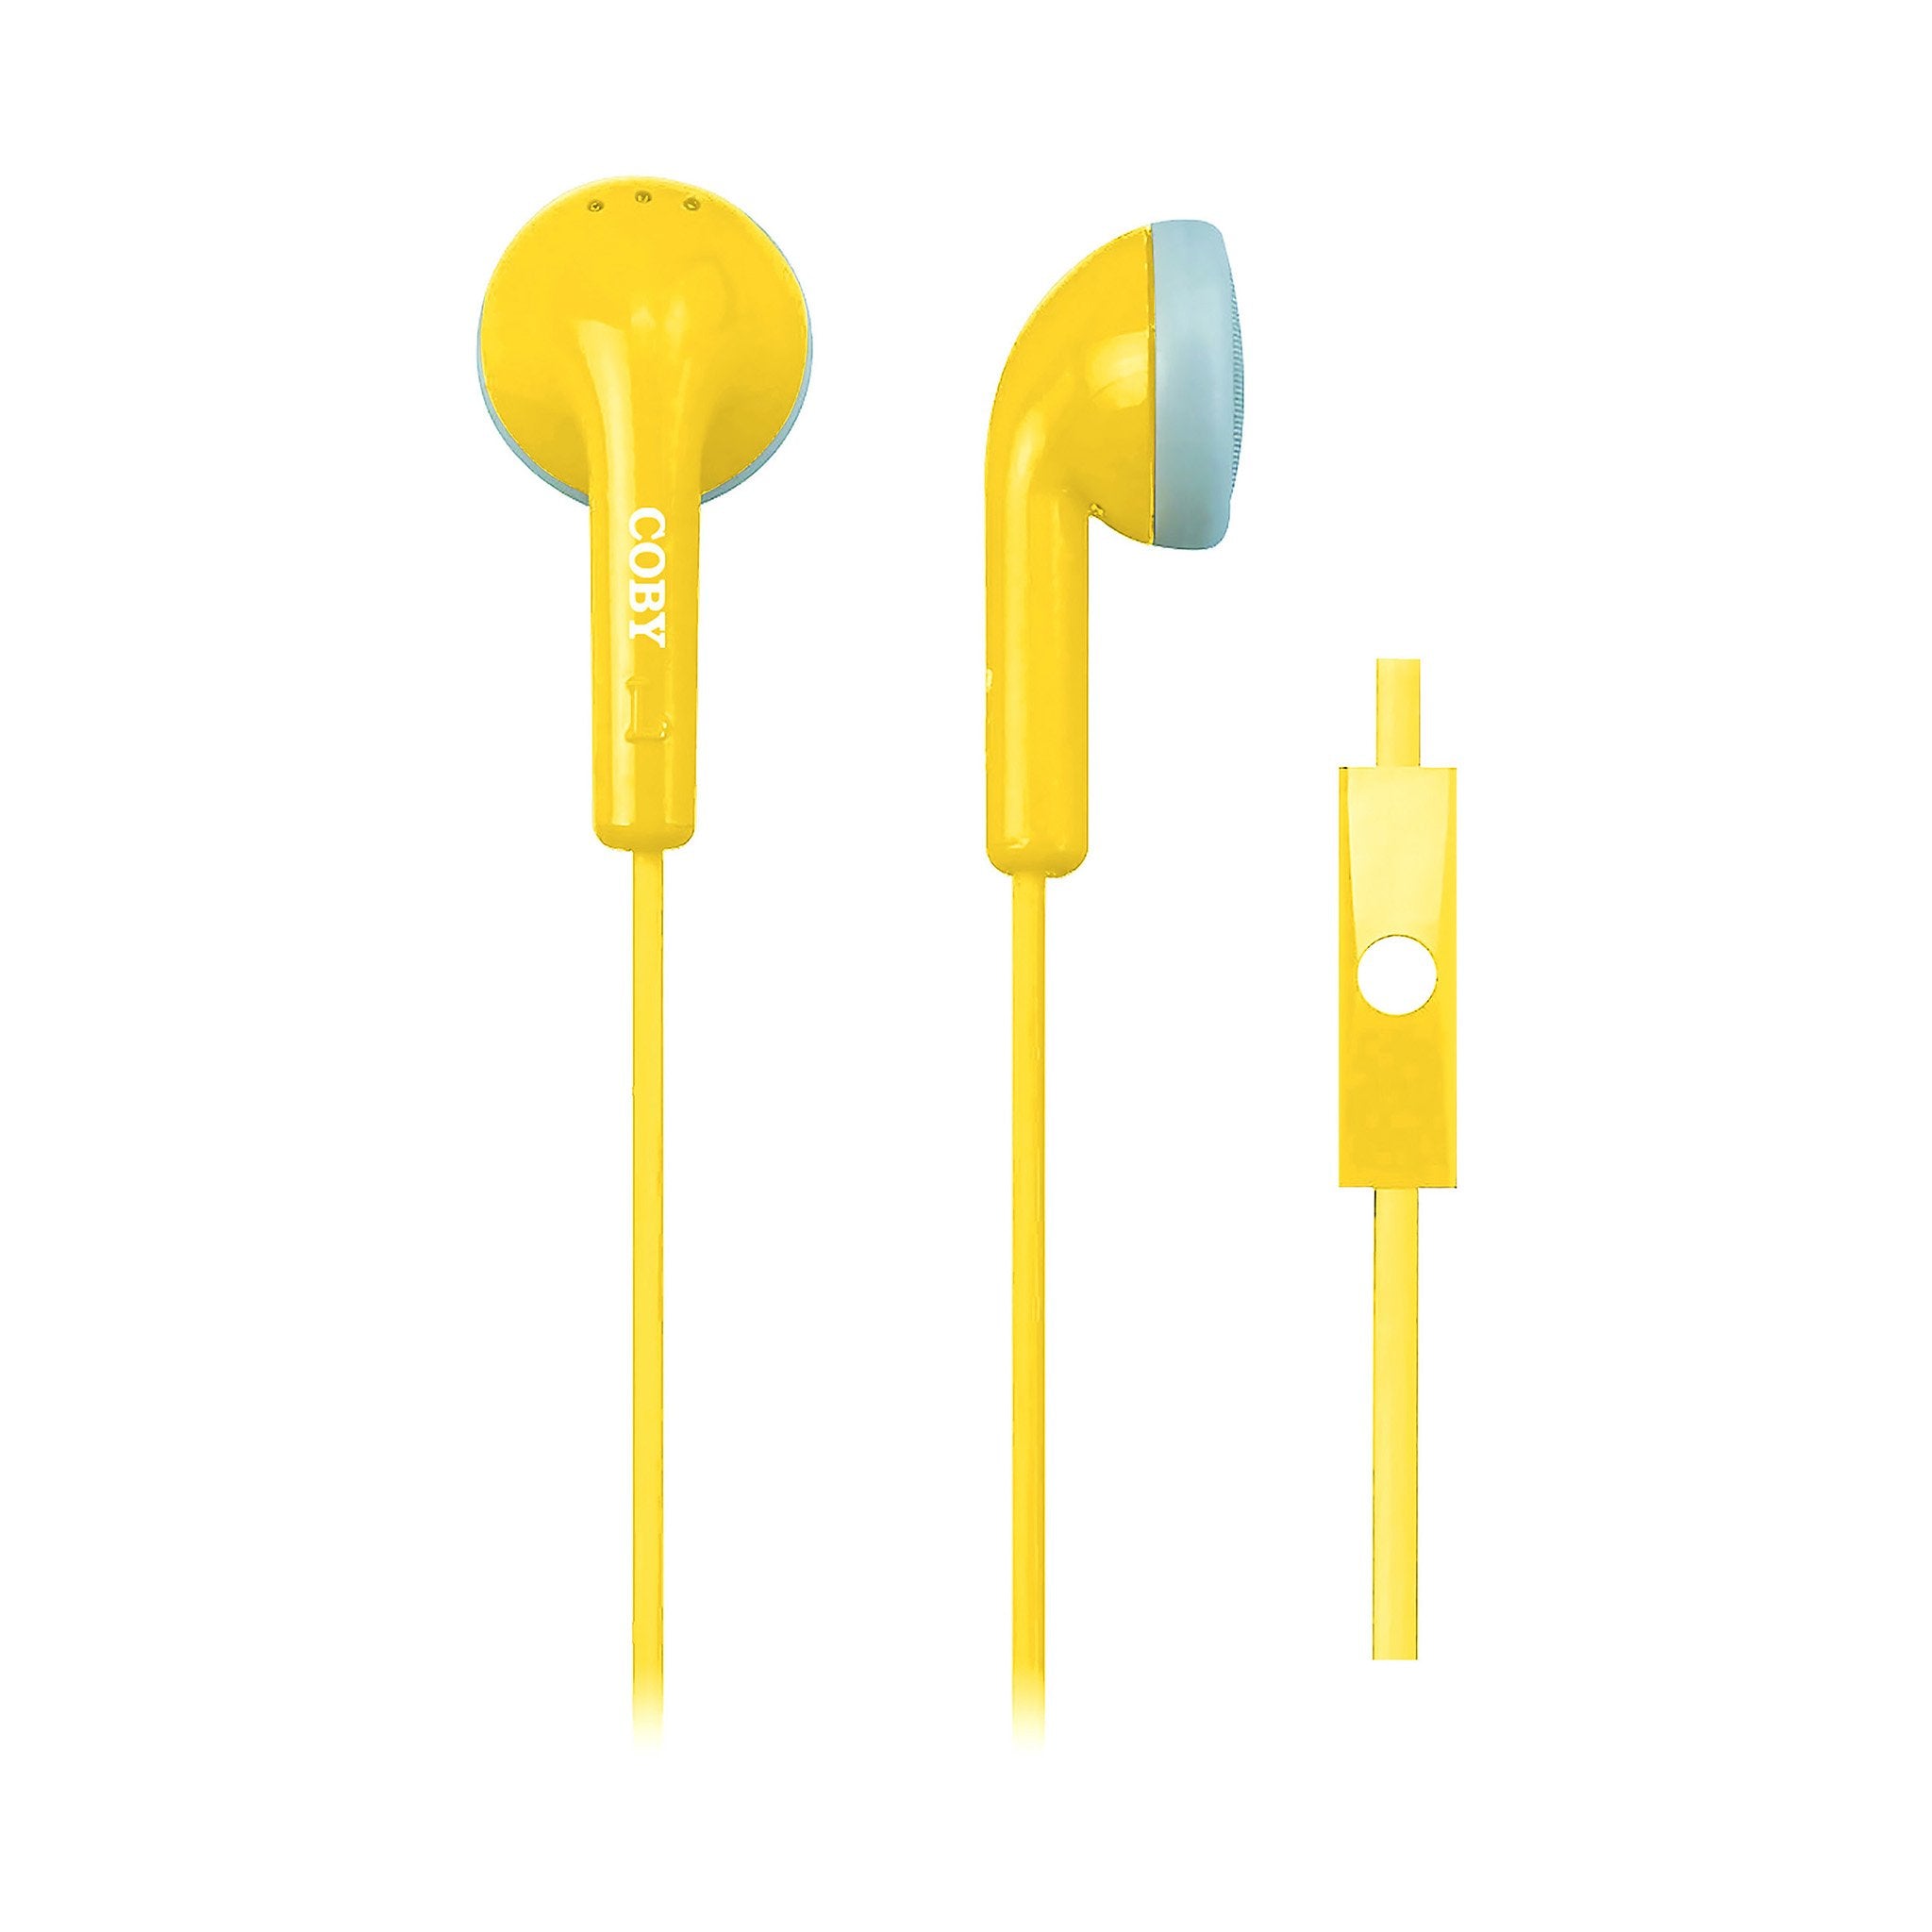 Echo Stereo Earbuds